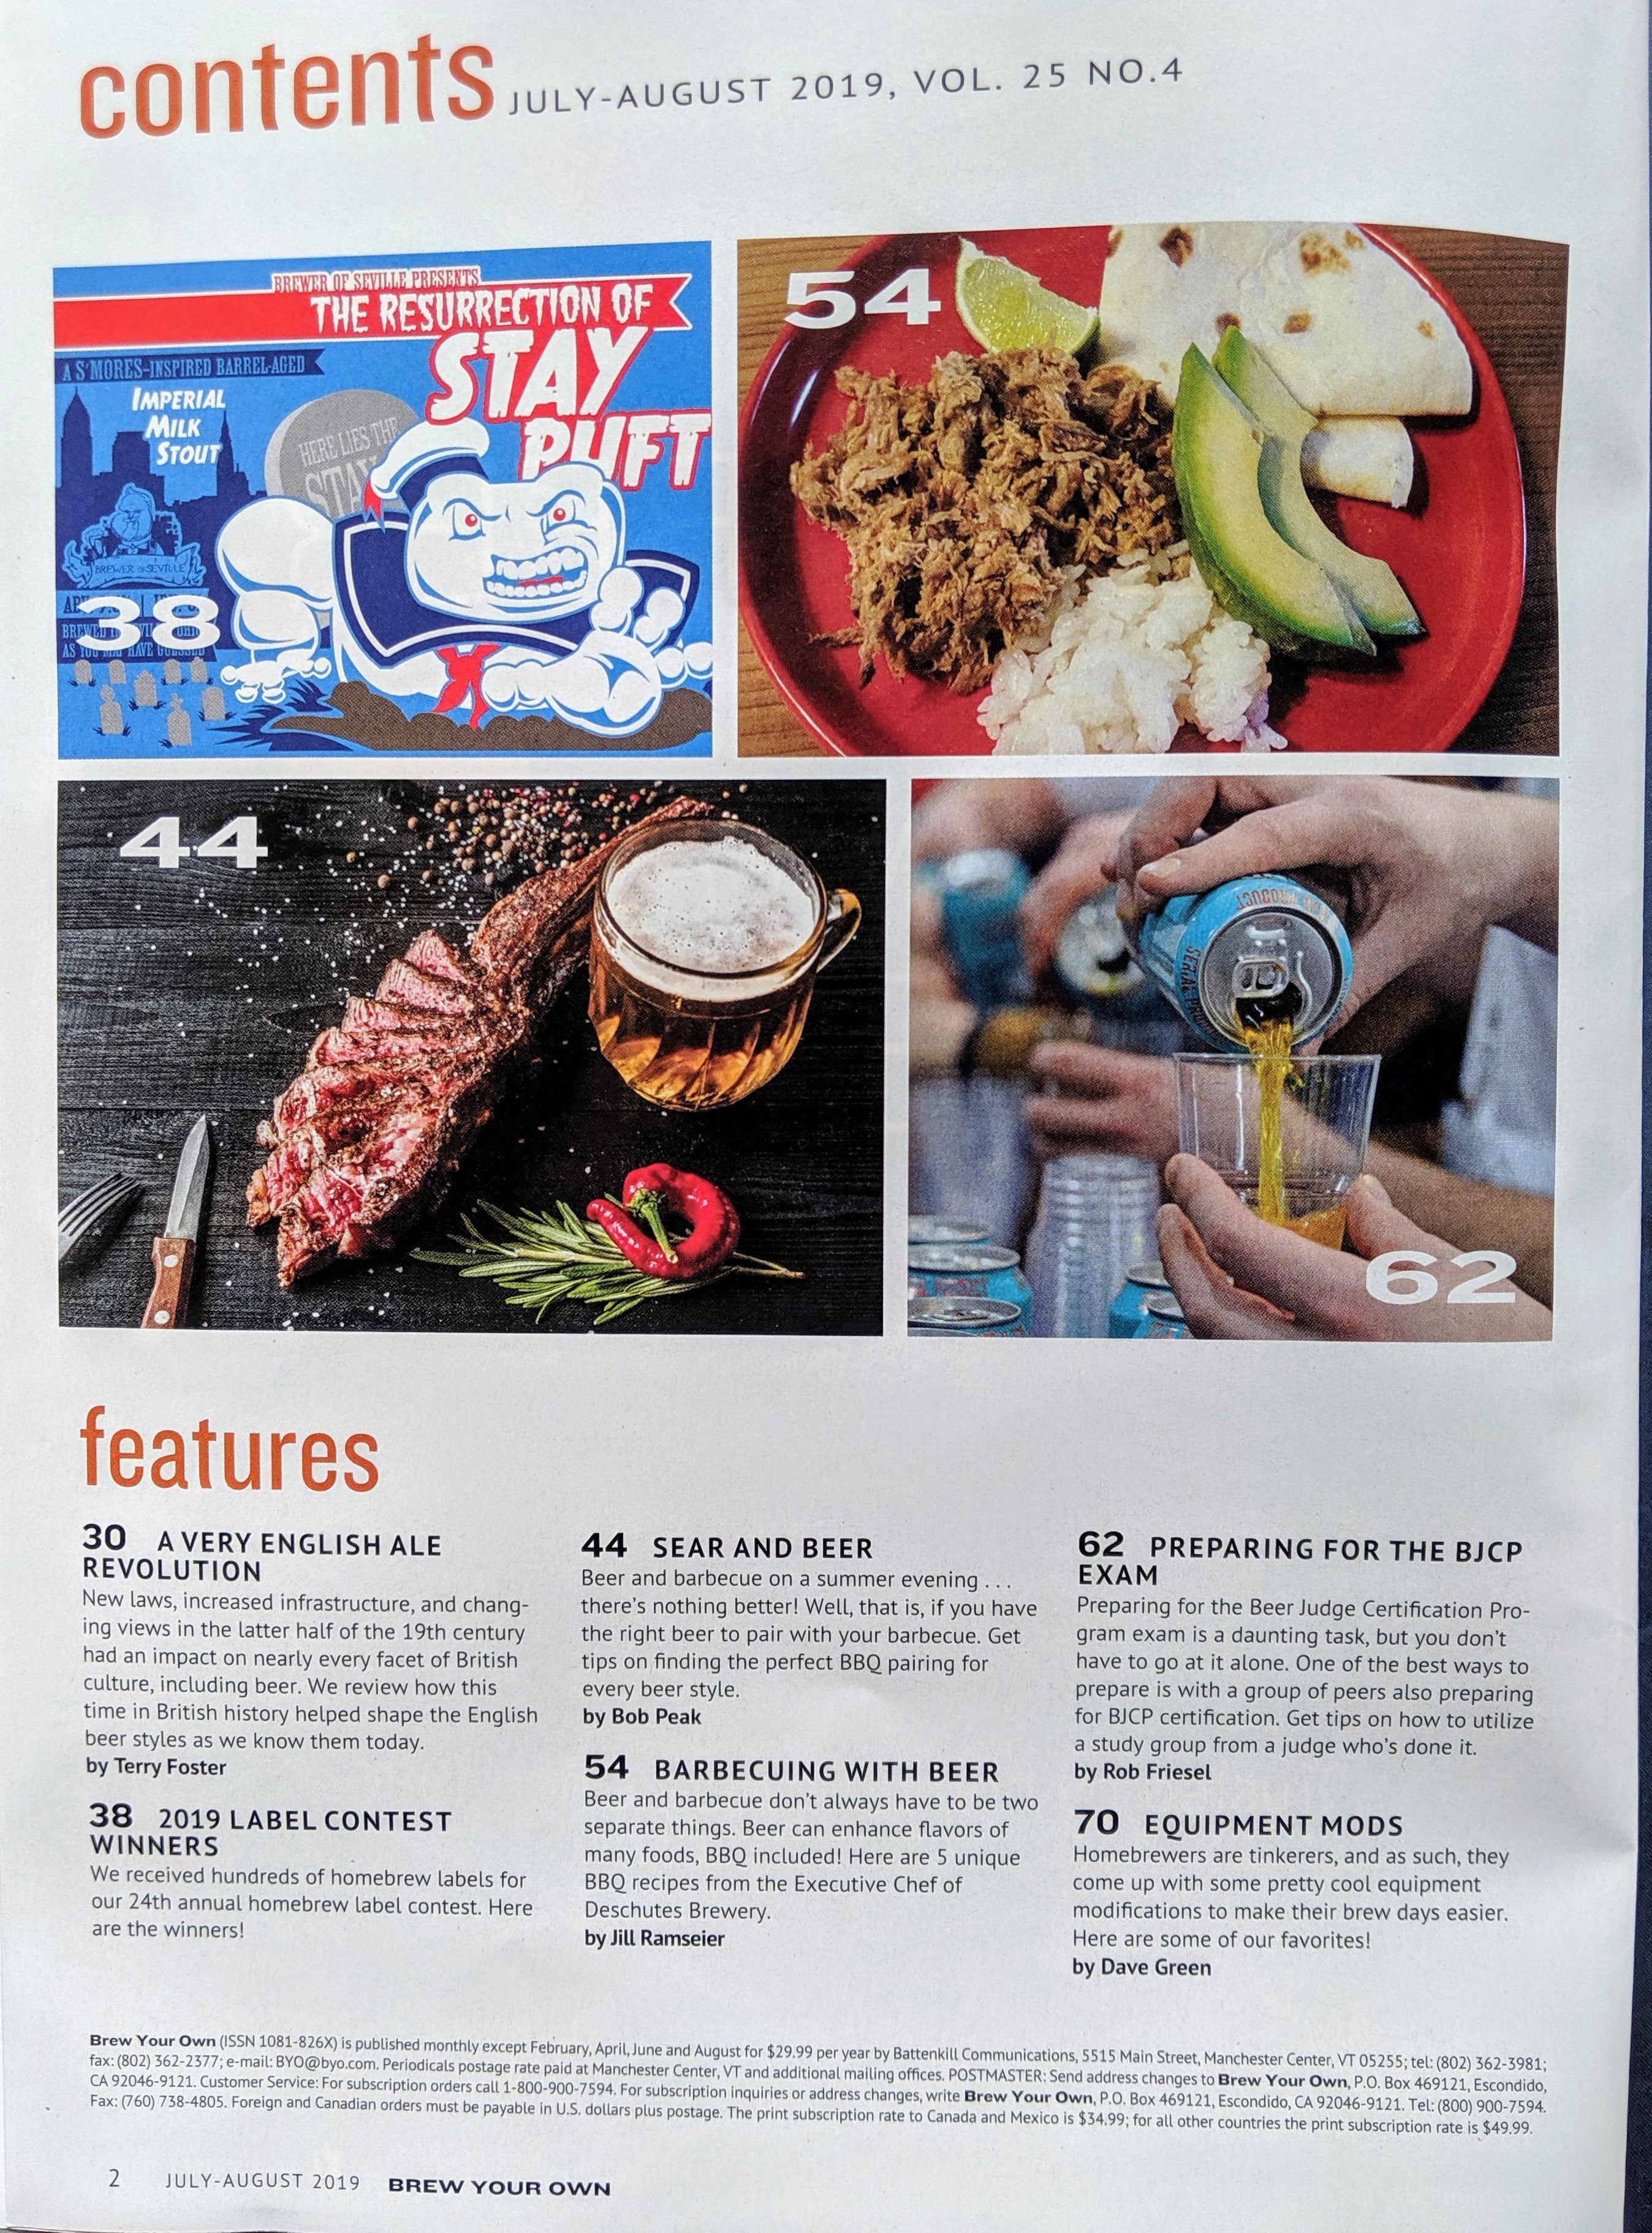 Brew Your Own - BYO Magazine - July-August 2019 - Vol. 25, No. 4 - 0